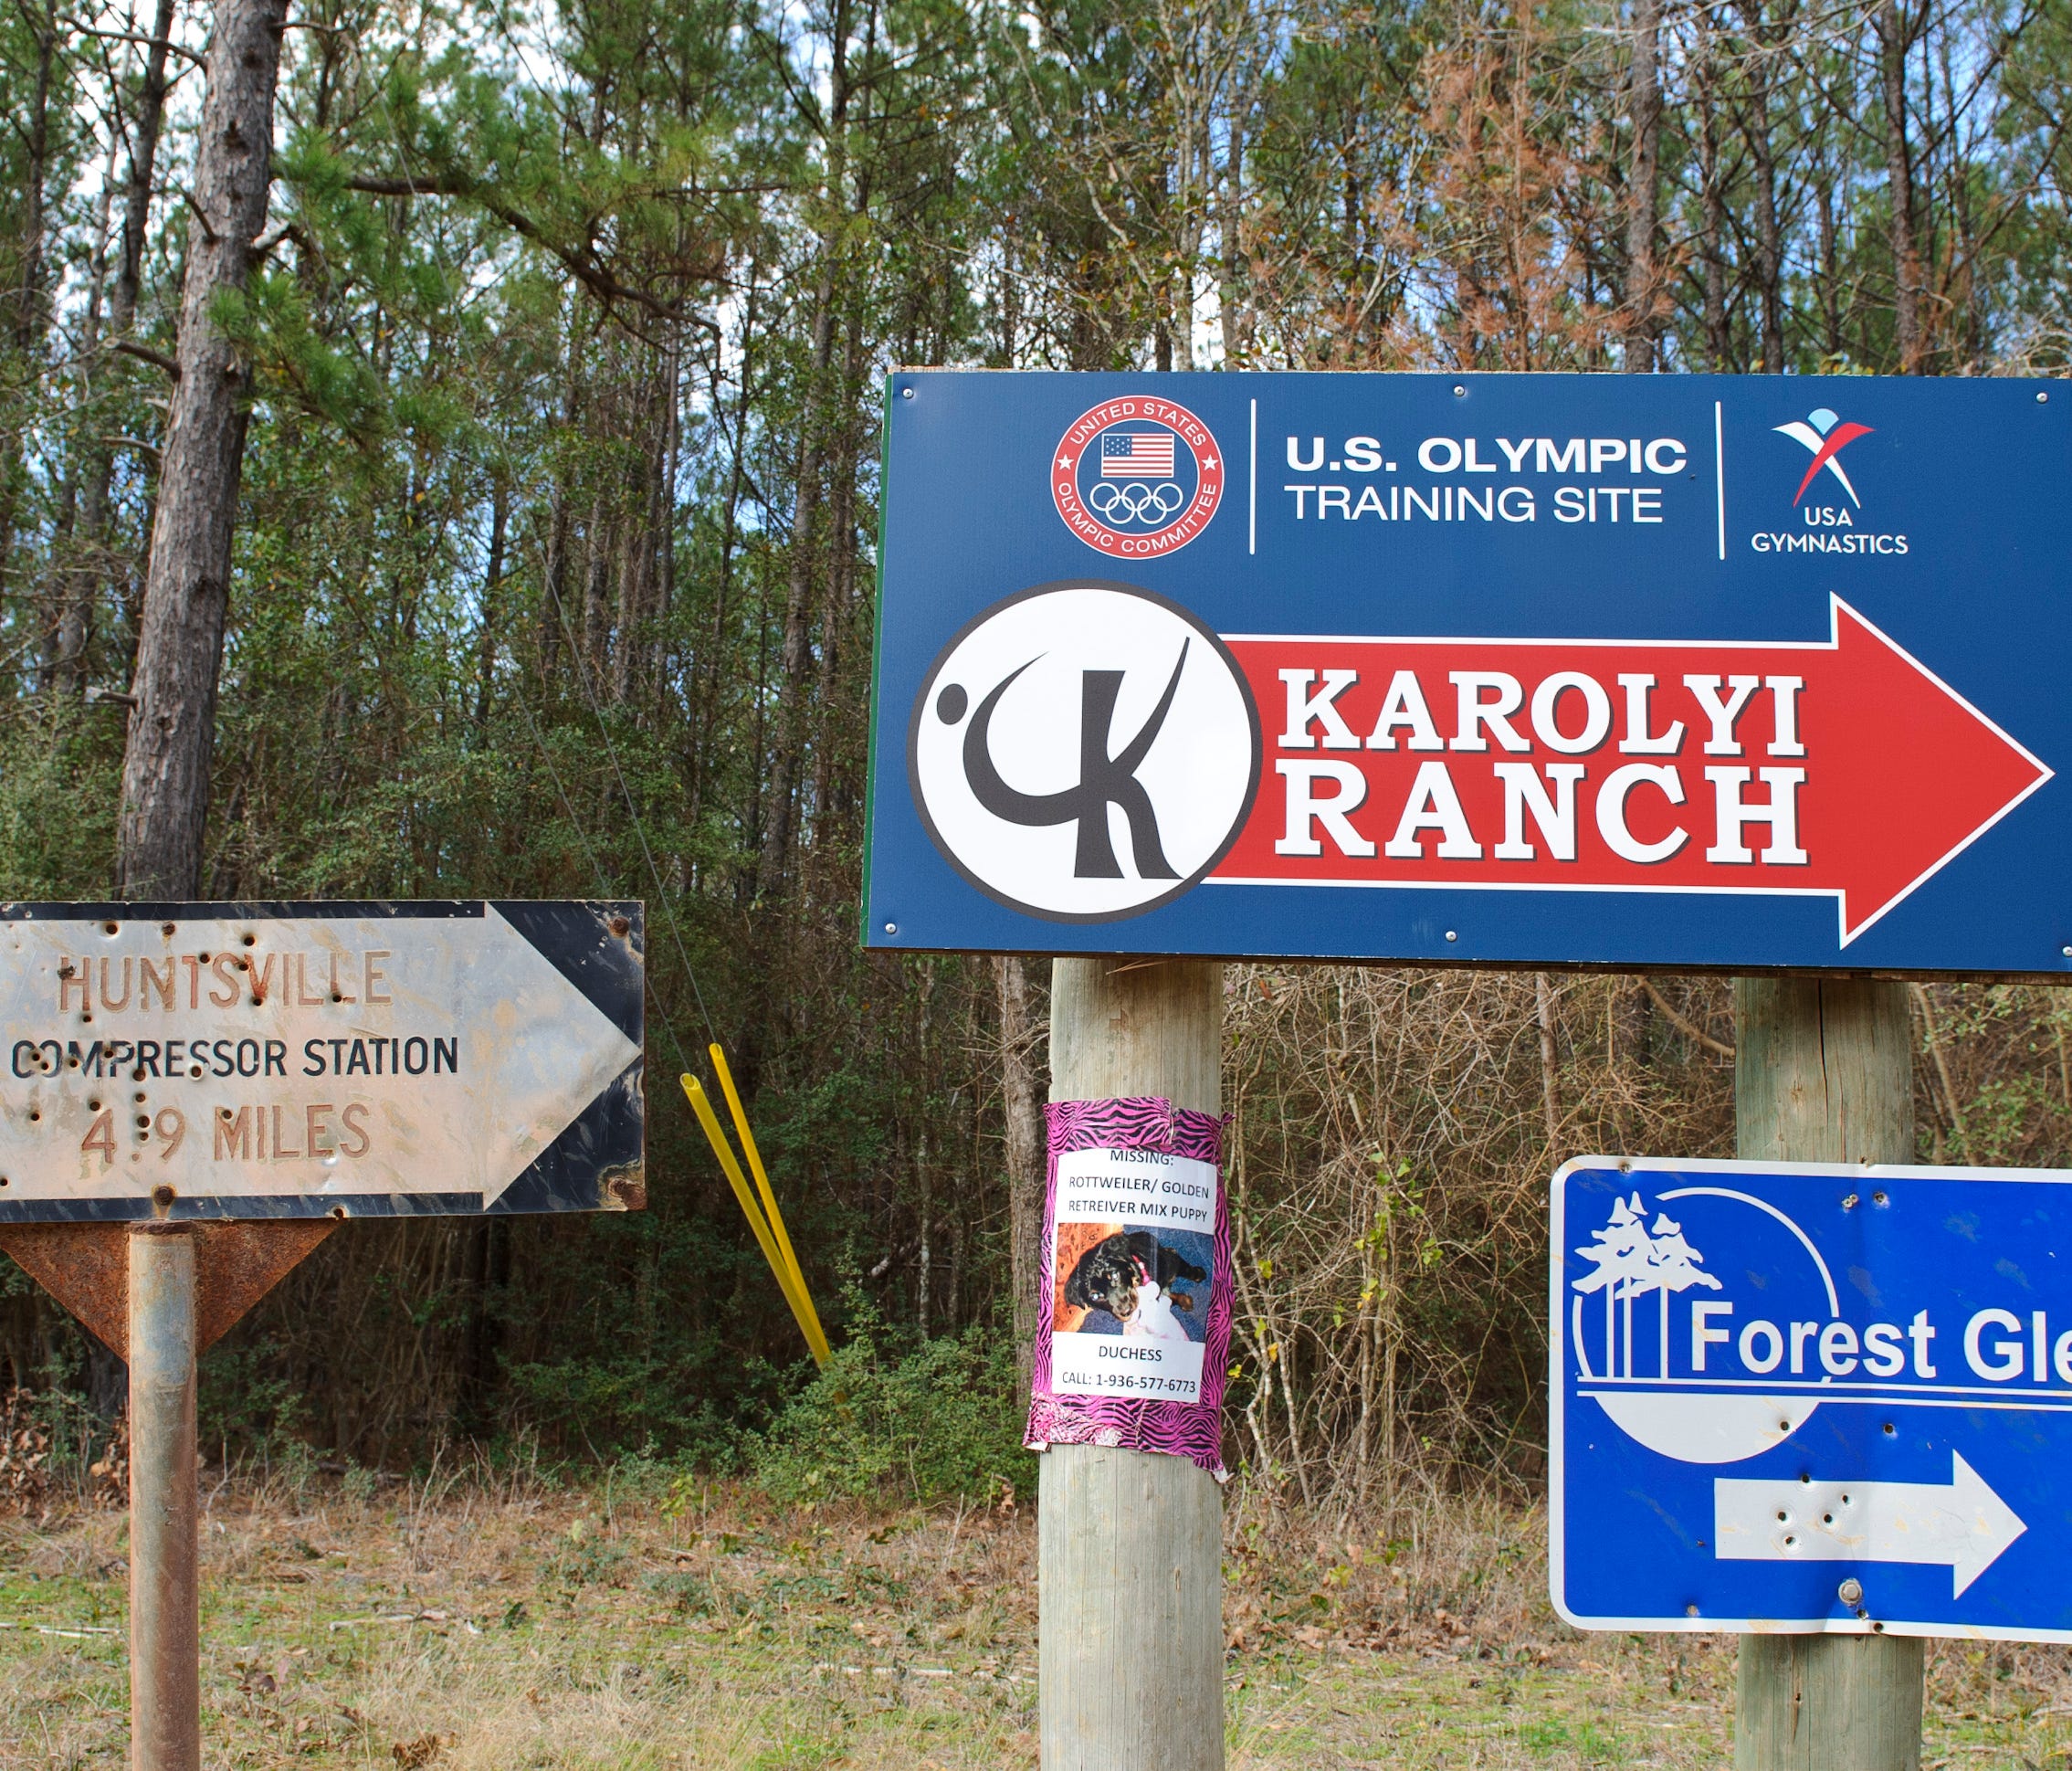 Signs point the way to the Karolyi Ranch in New Waverly, Texas, in a file photo from 2012.